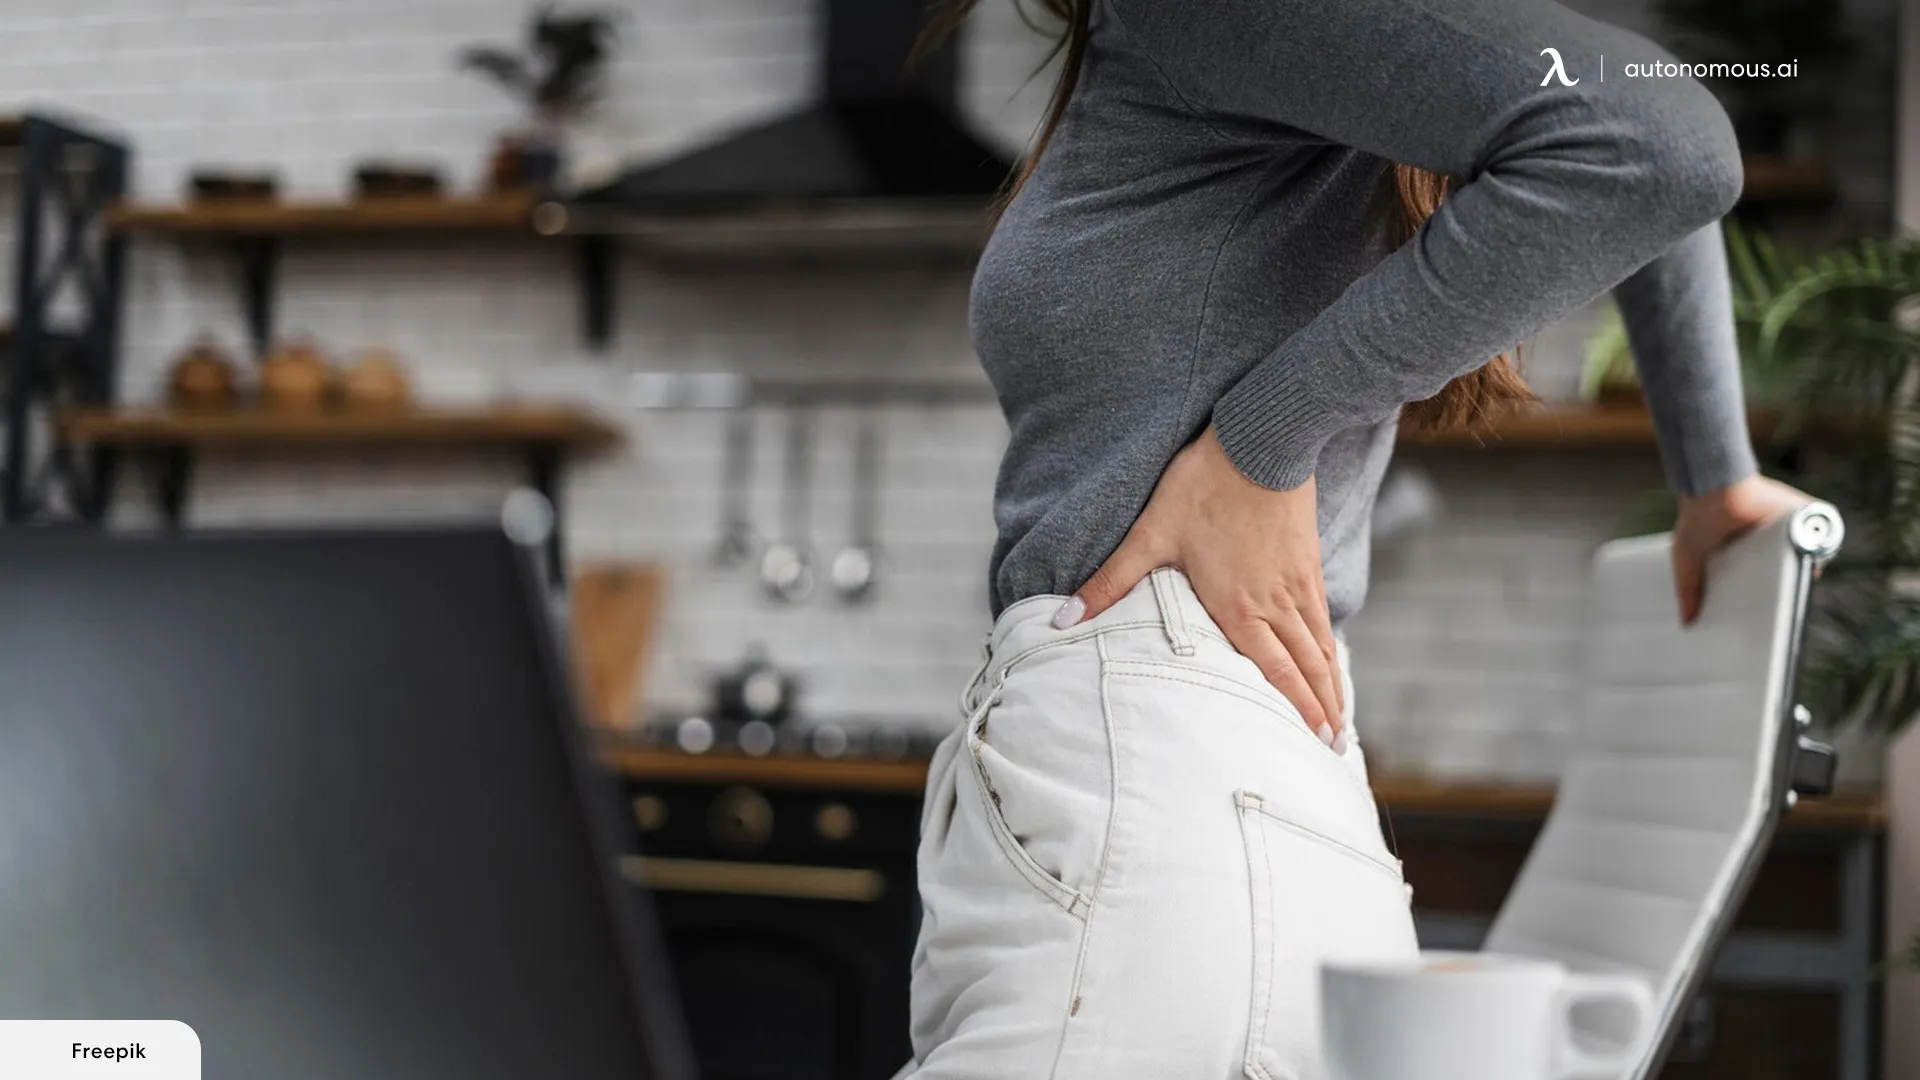 Why Do My Ribs Hurt When I Sit Too Long at the Desk?